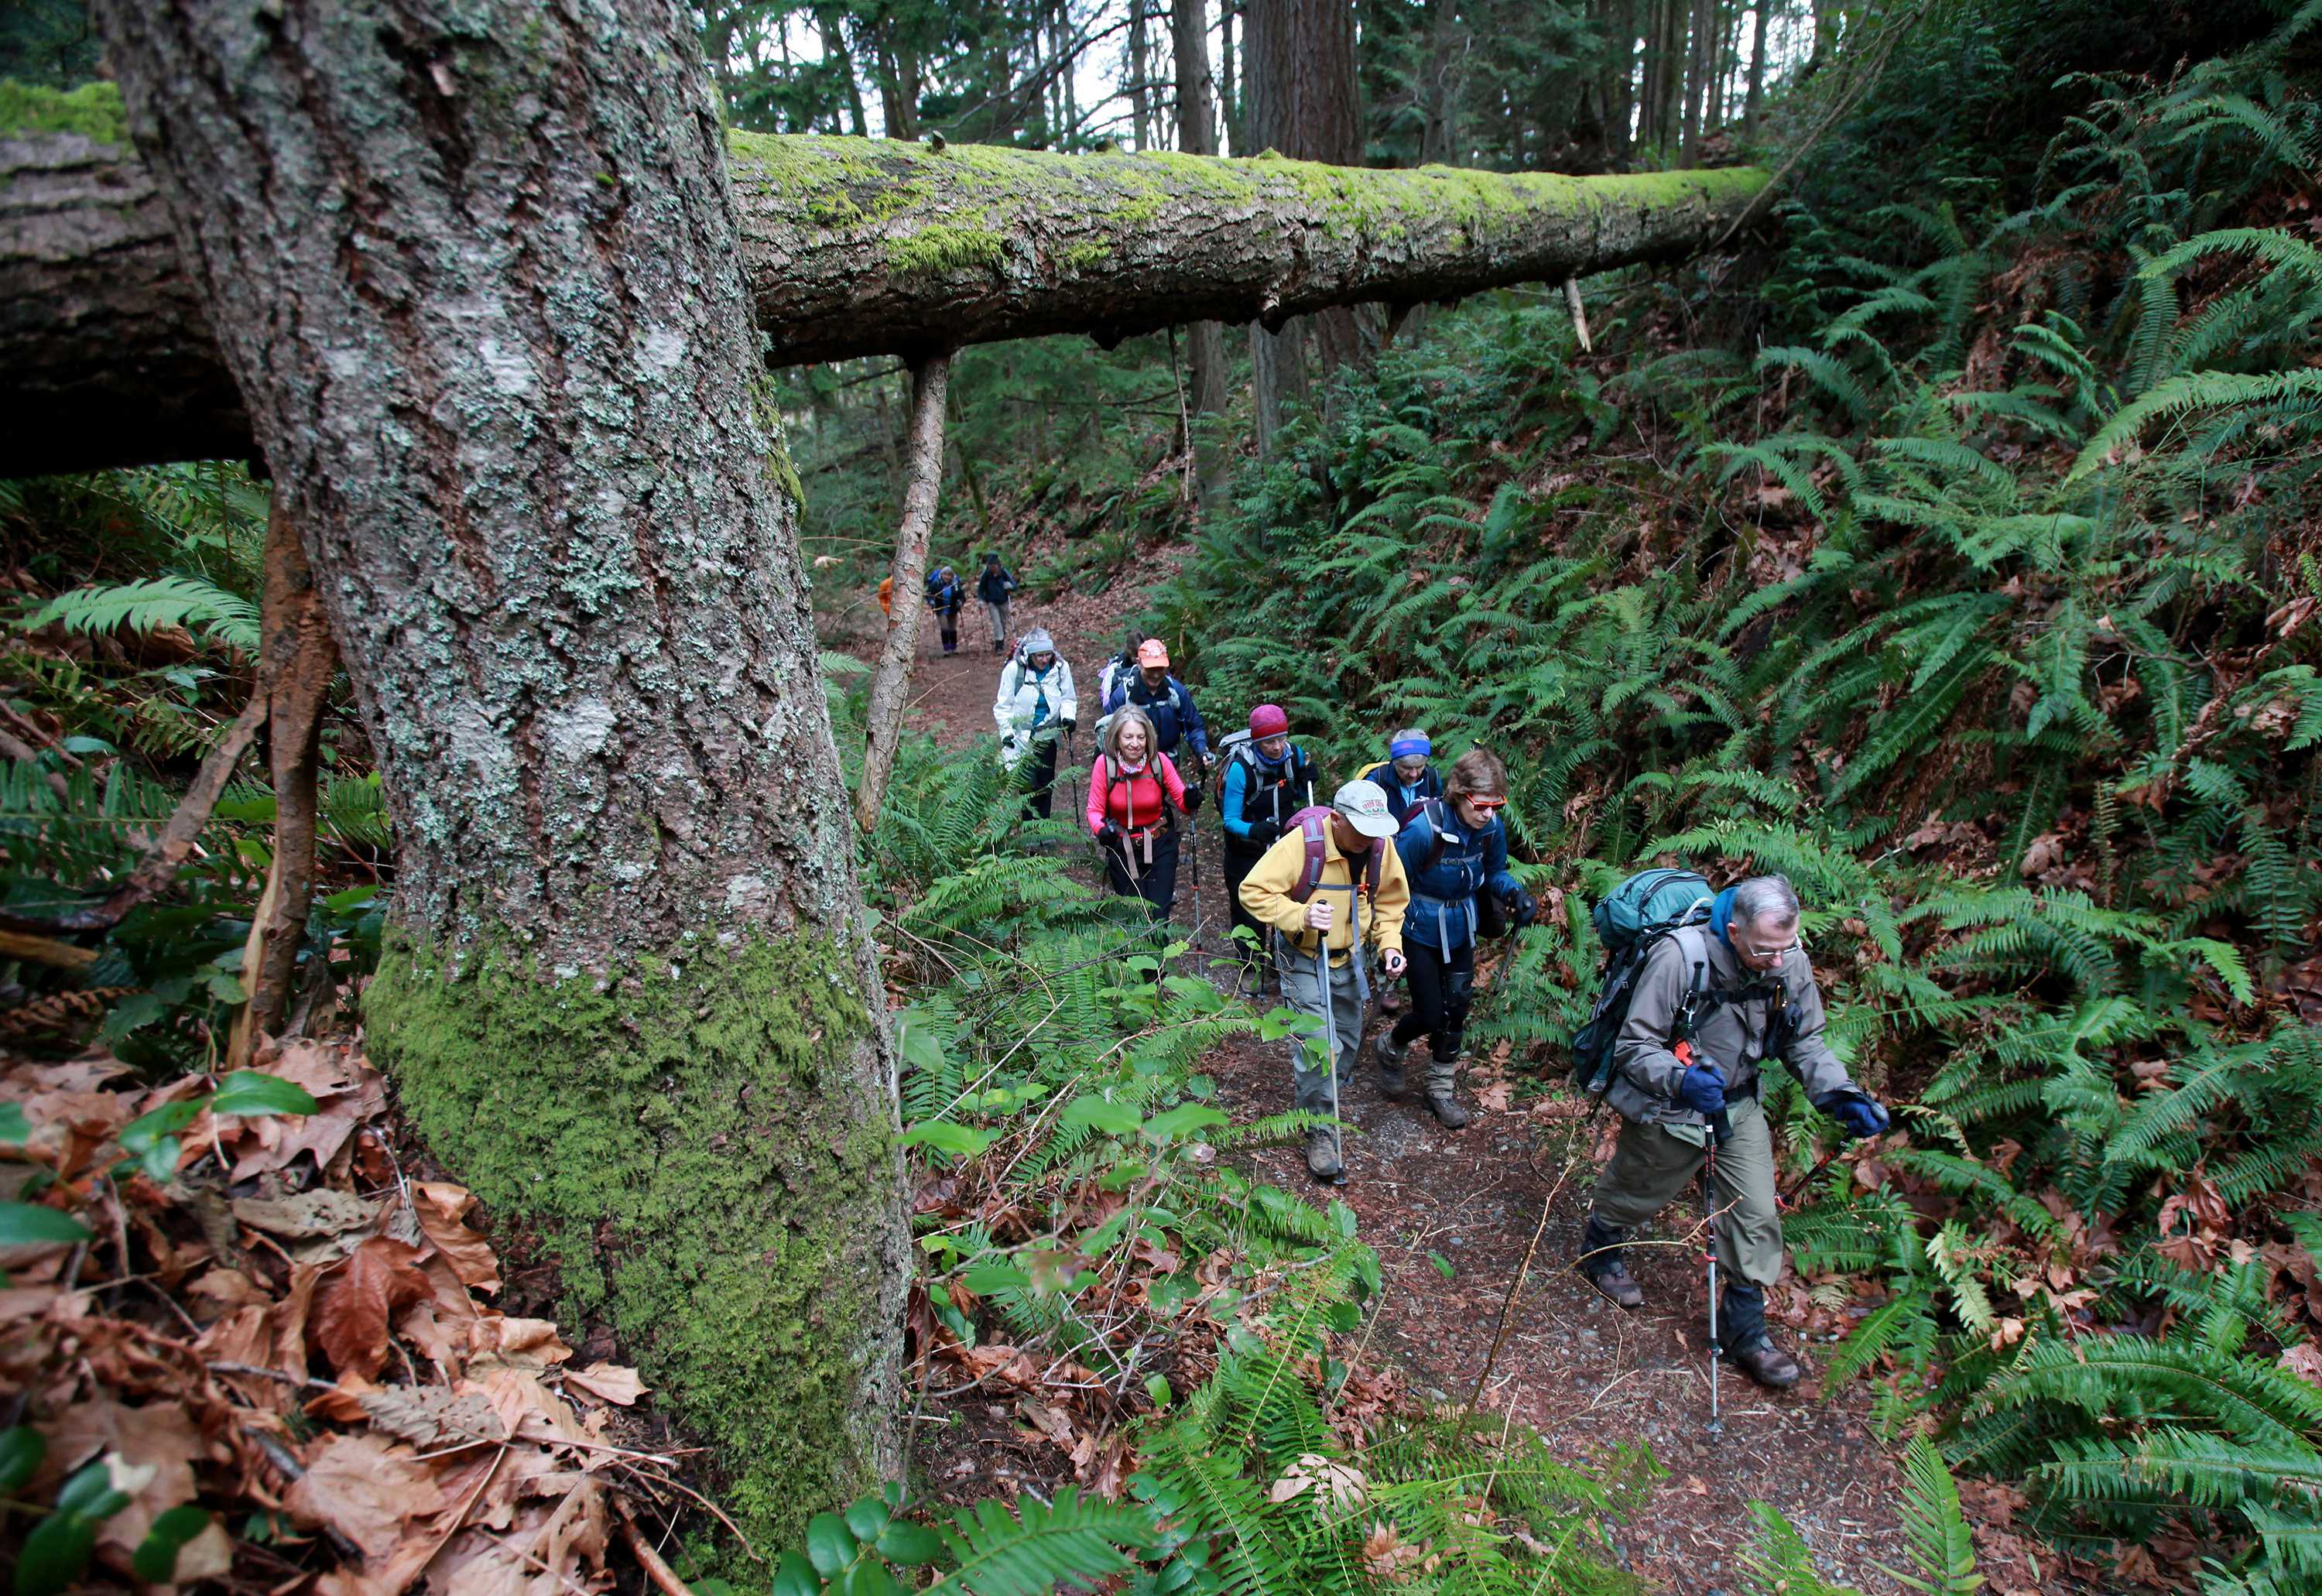 Pete Girard, right, leads a hike on Squak Mountain, which is usually snow-free. (Ken Lambert/Seattle Times/TNS)